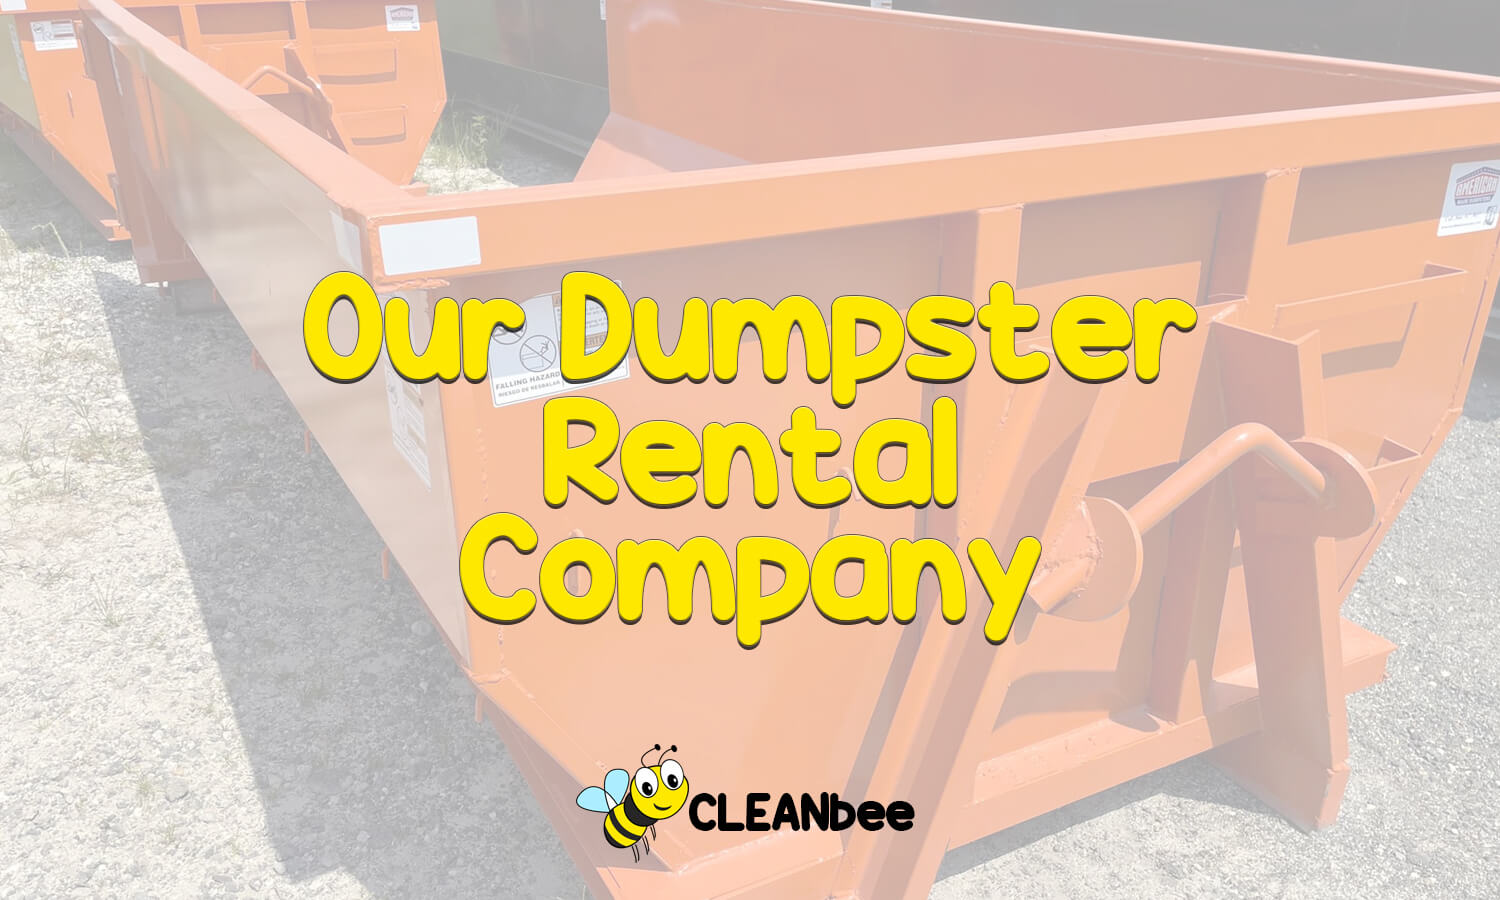 Our Dumpster Rental Company